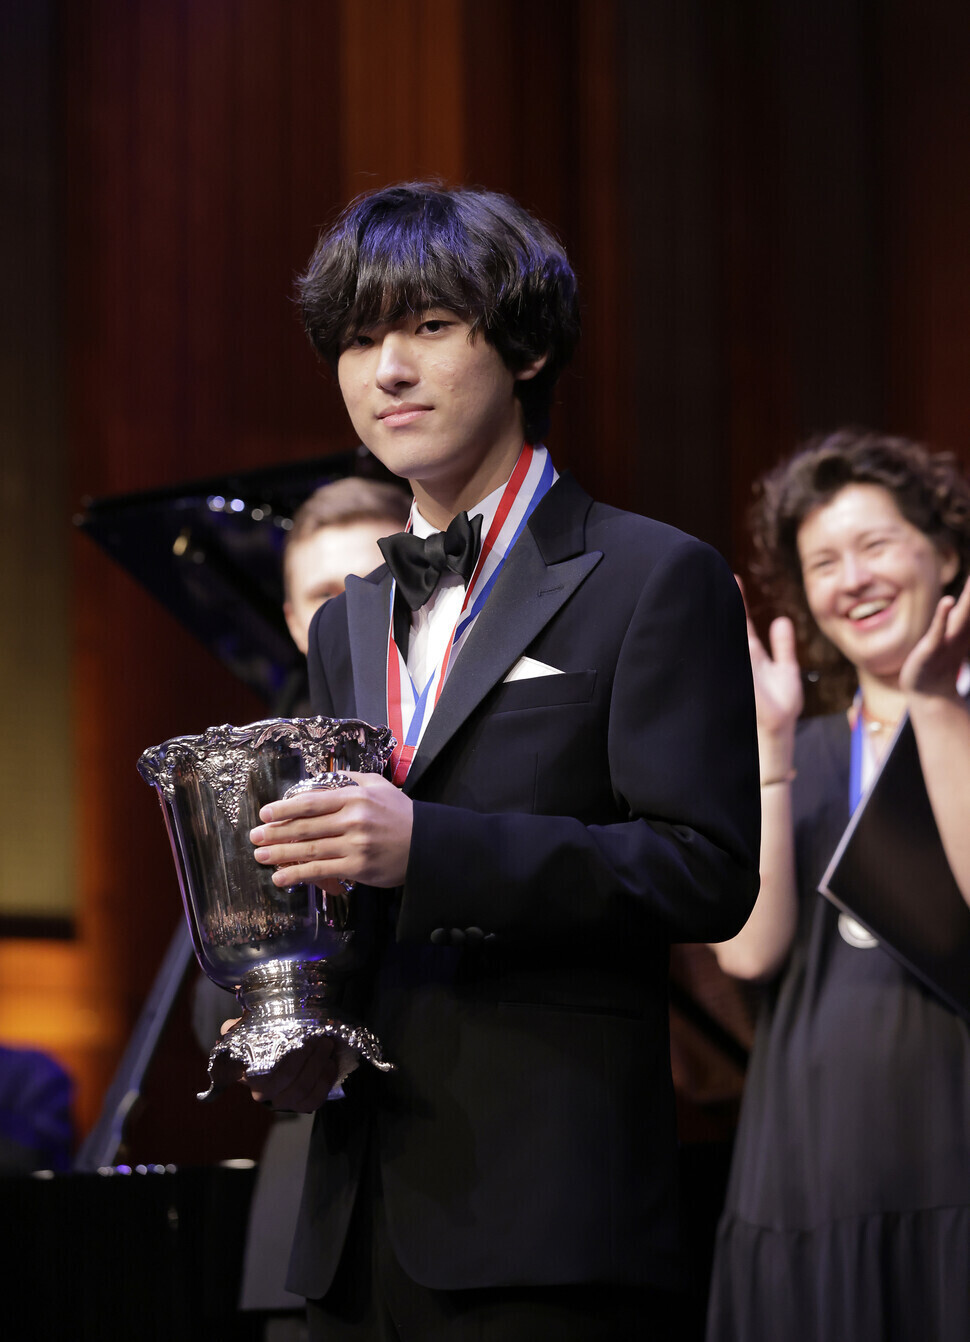 Lim holds his trophy after winning gold at the Van Cliburn competition on June 18 in Fort Worth, Texas. (provided by the Van Cliburn Foundation/WFIMC)